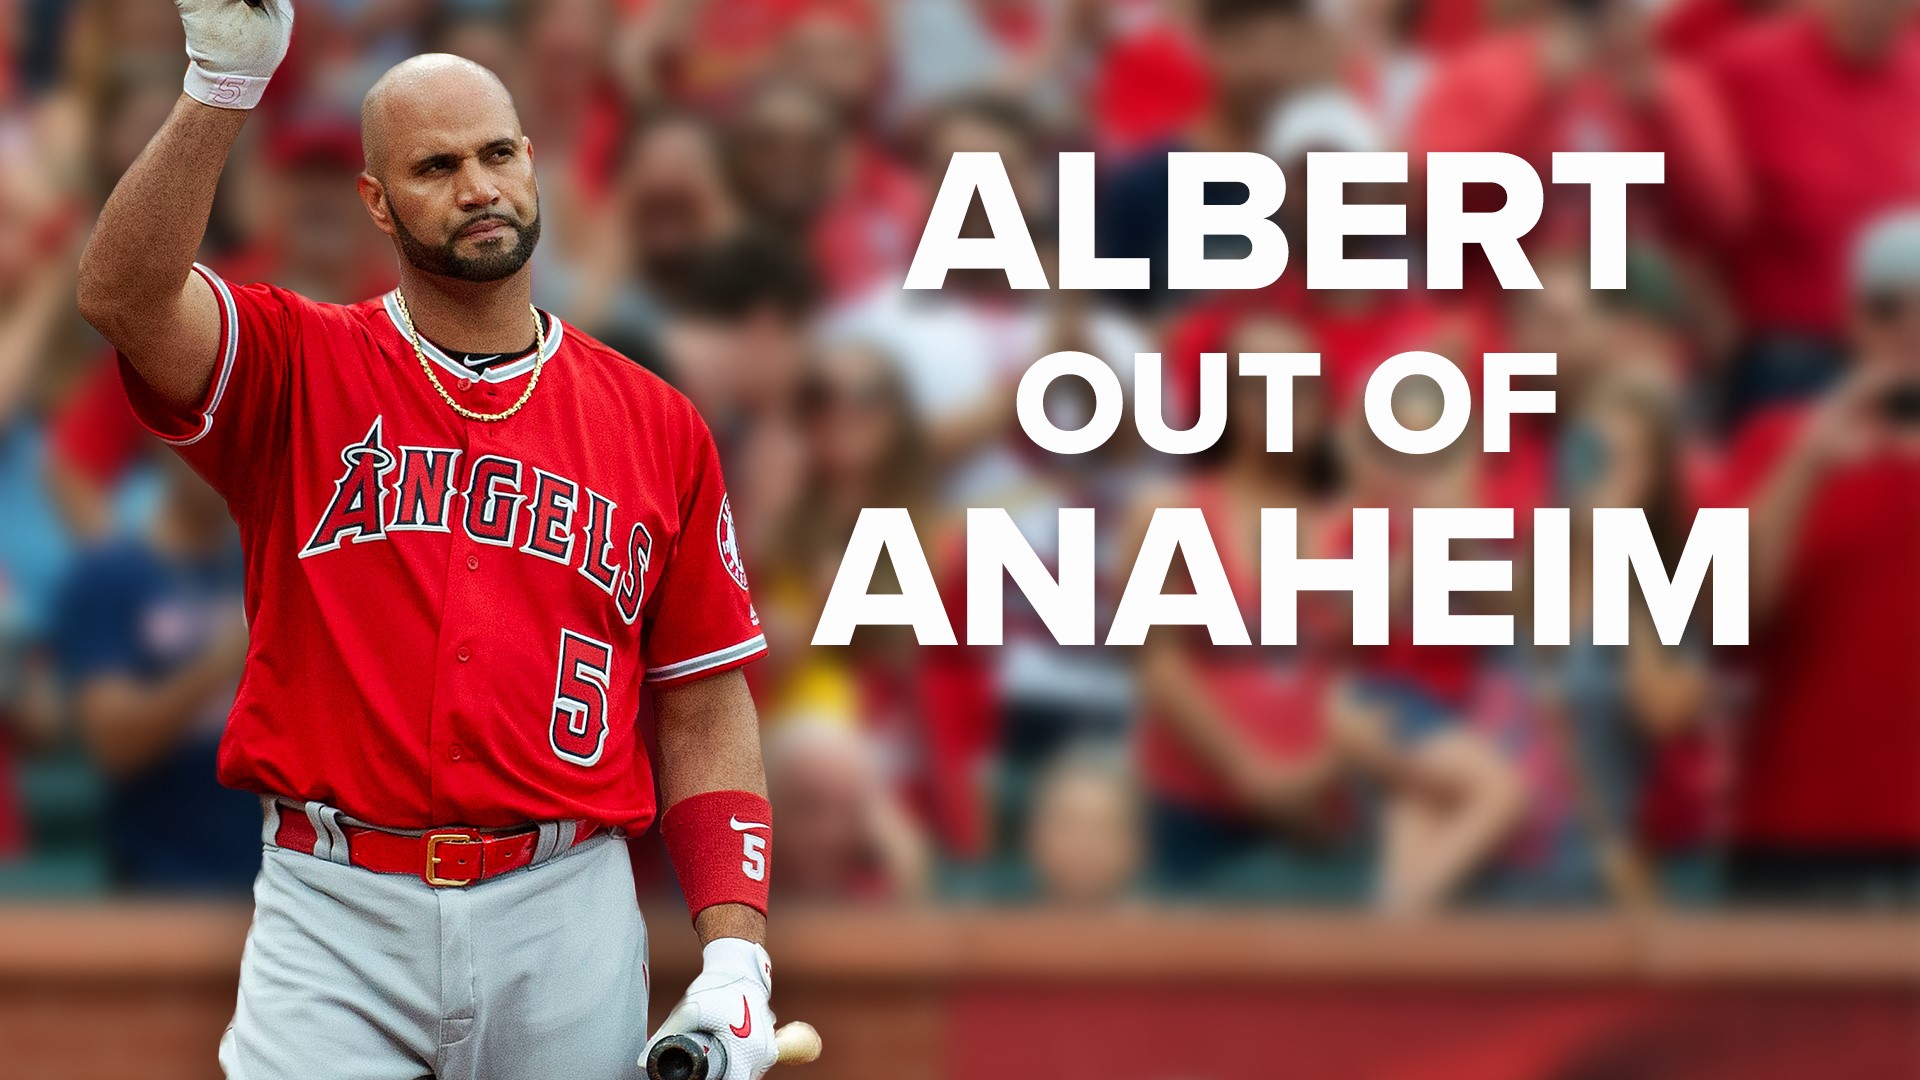 Albert Pujols Is Designated for Assignment by Angels - The New York Times